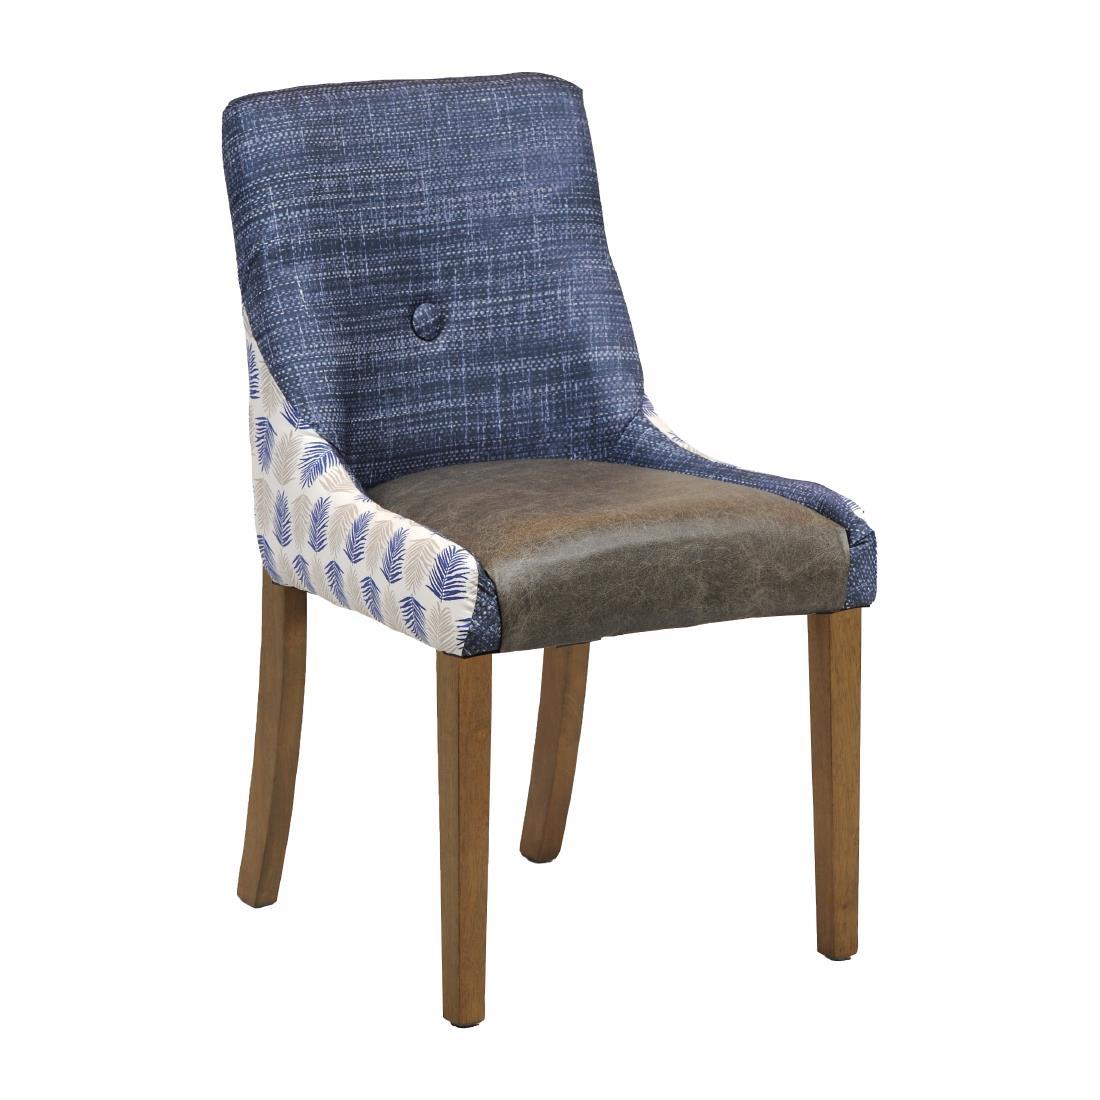 Bath Dining Chair Weathered Oak with Alfresco Marine Outer Back Saddle Ash Seat